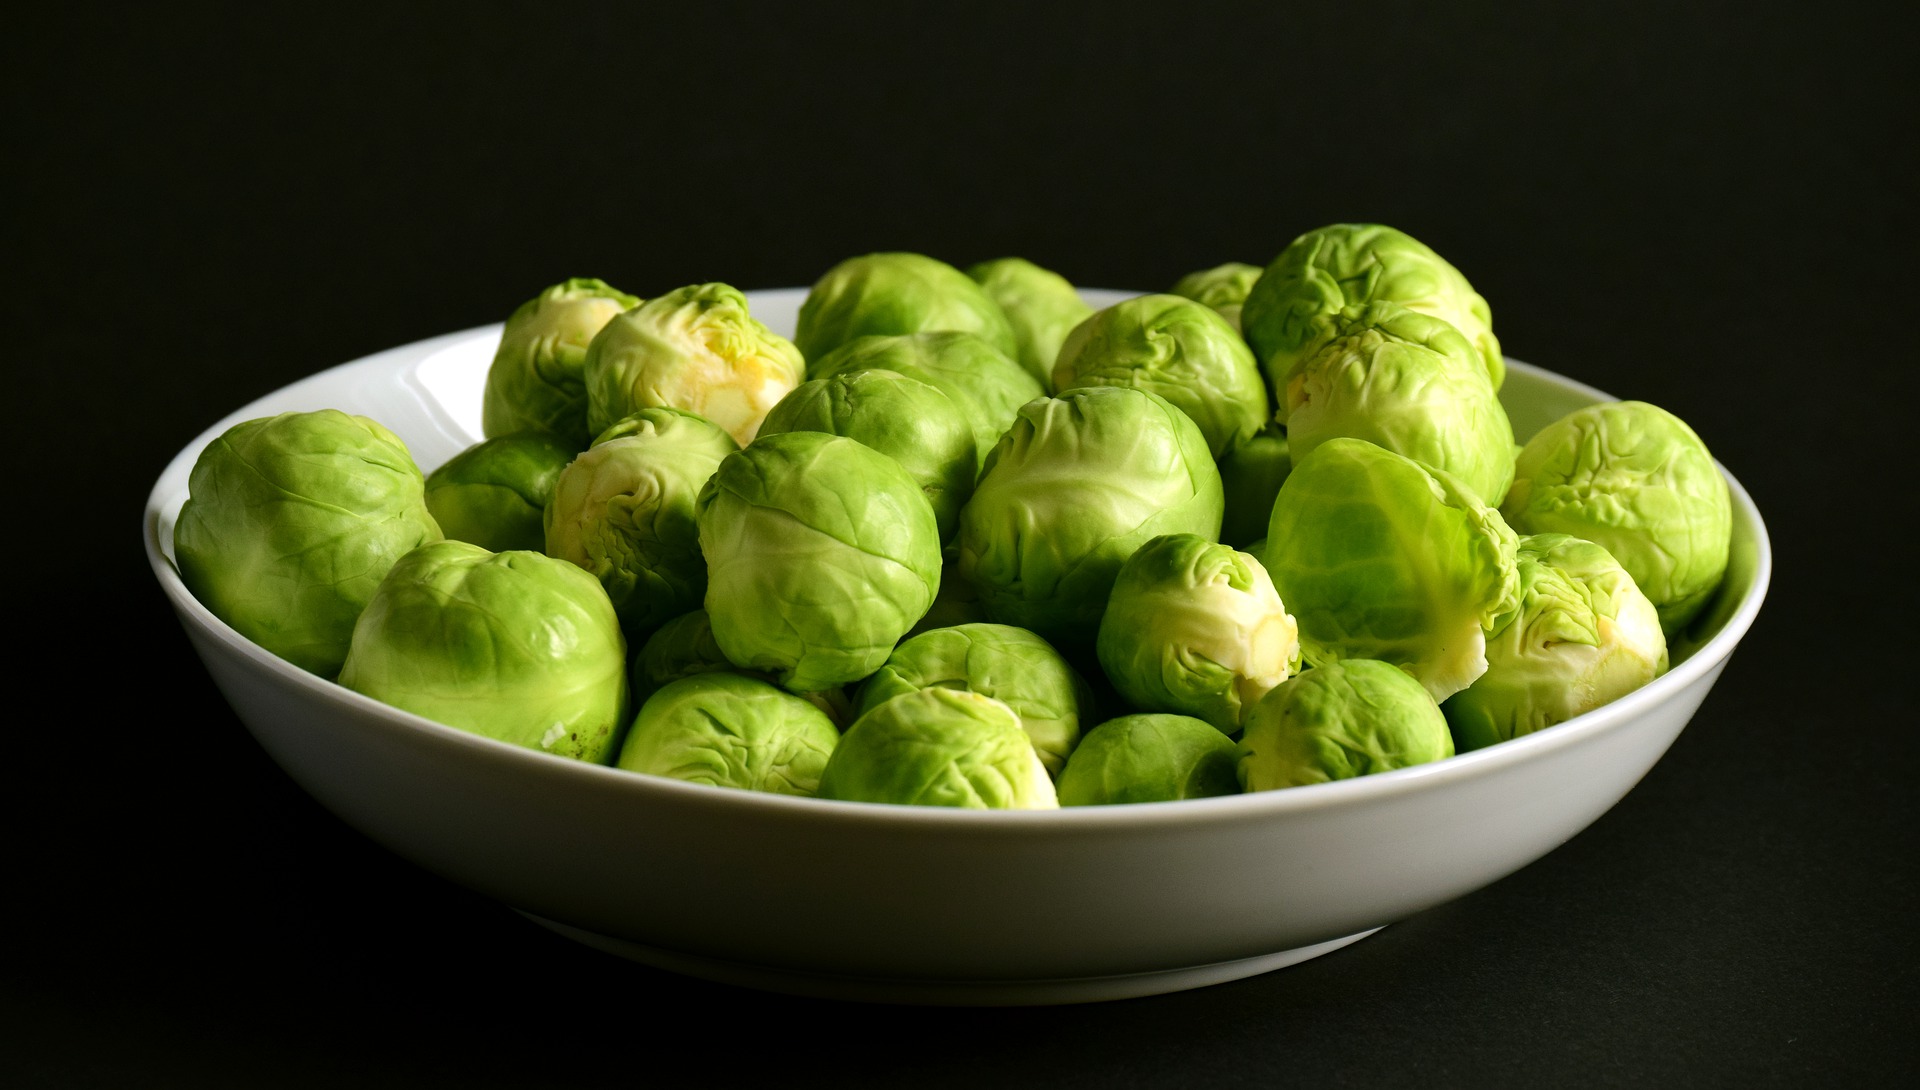 brussels-sprouts-3100702_1920